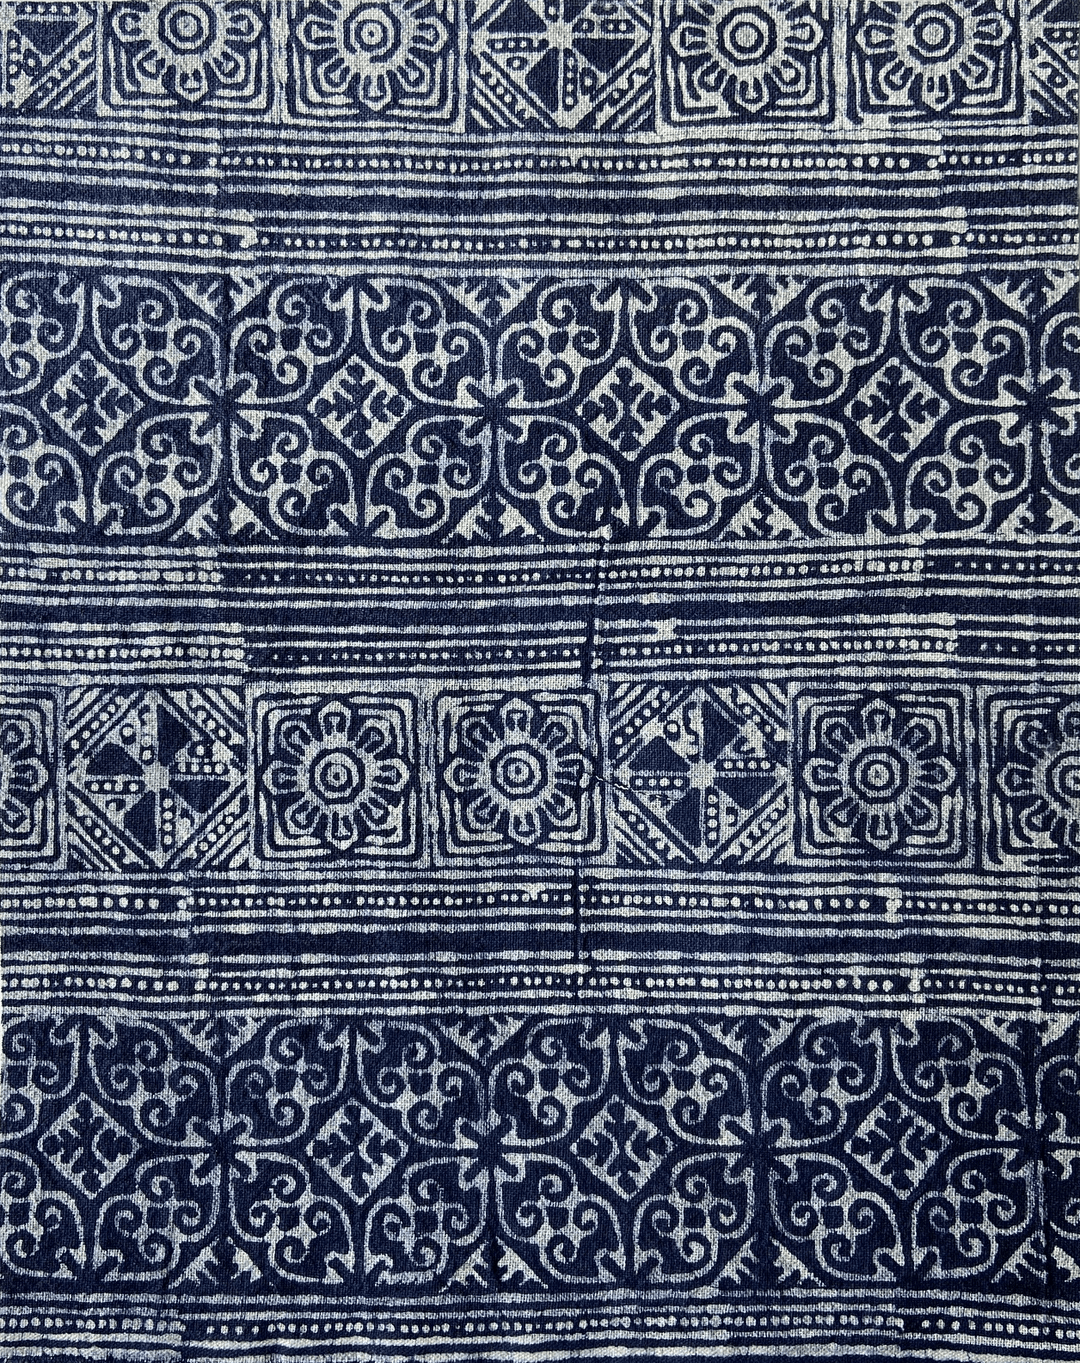 The Sunflower Batik Fabric in blue to use in your own DIY projects.